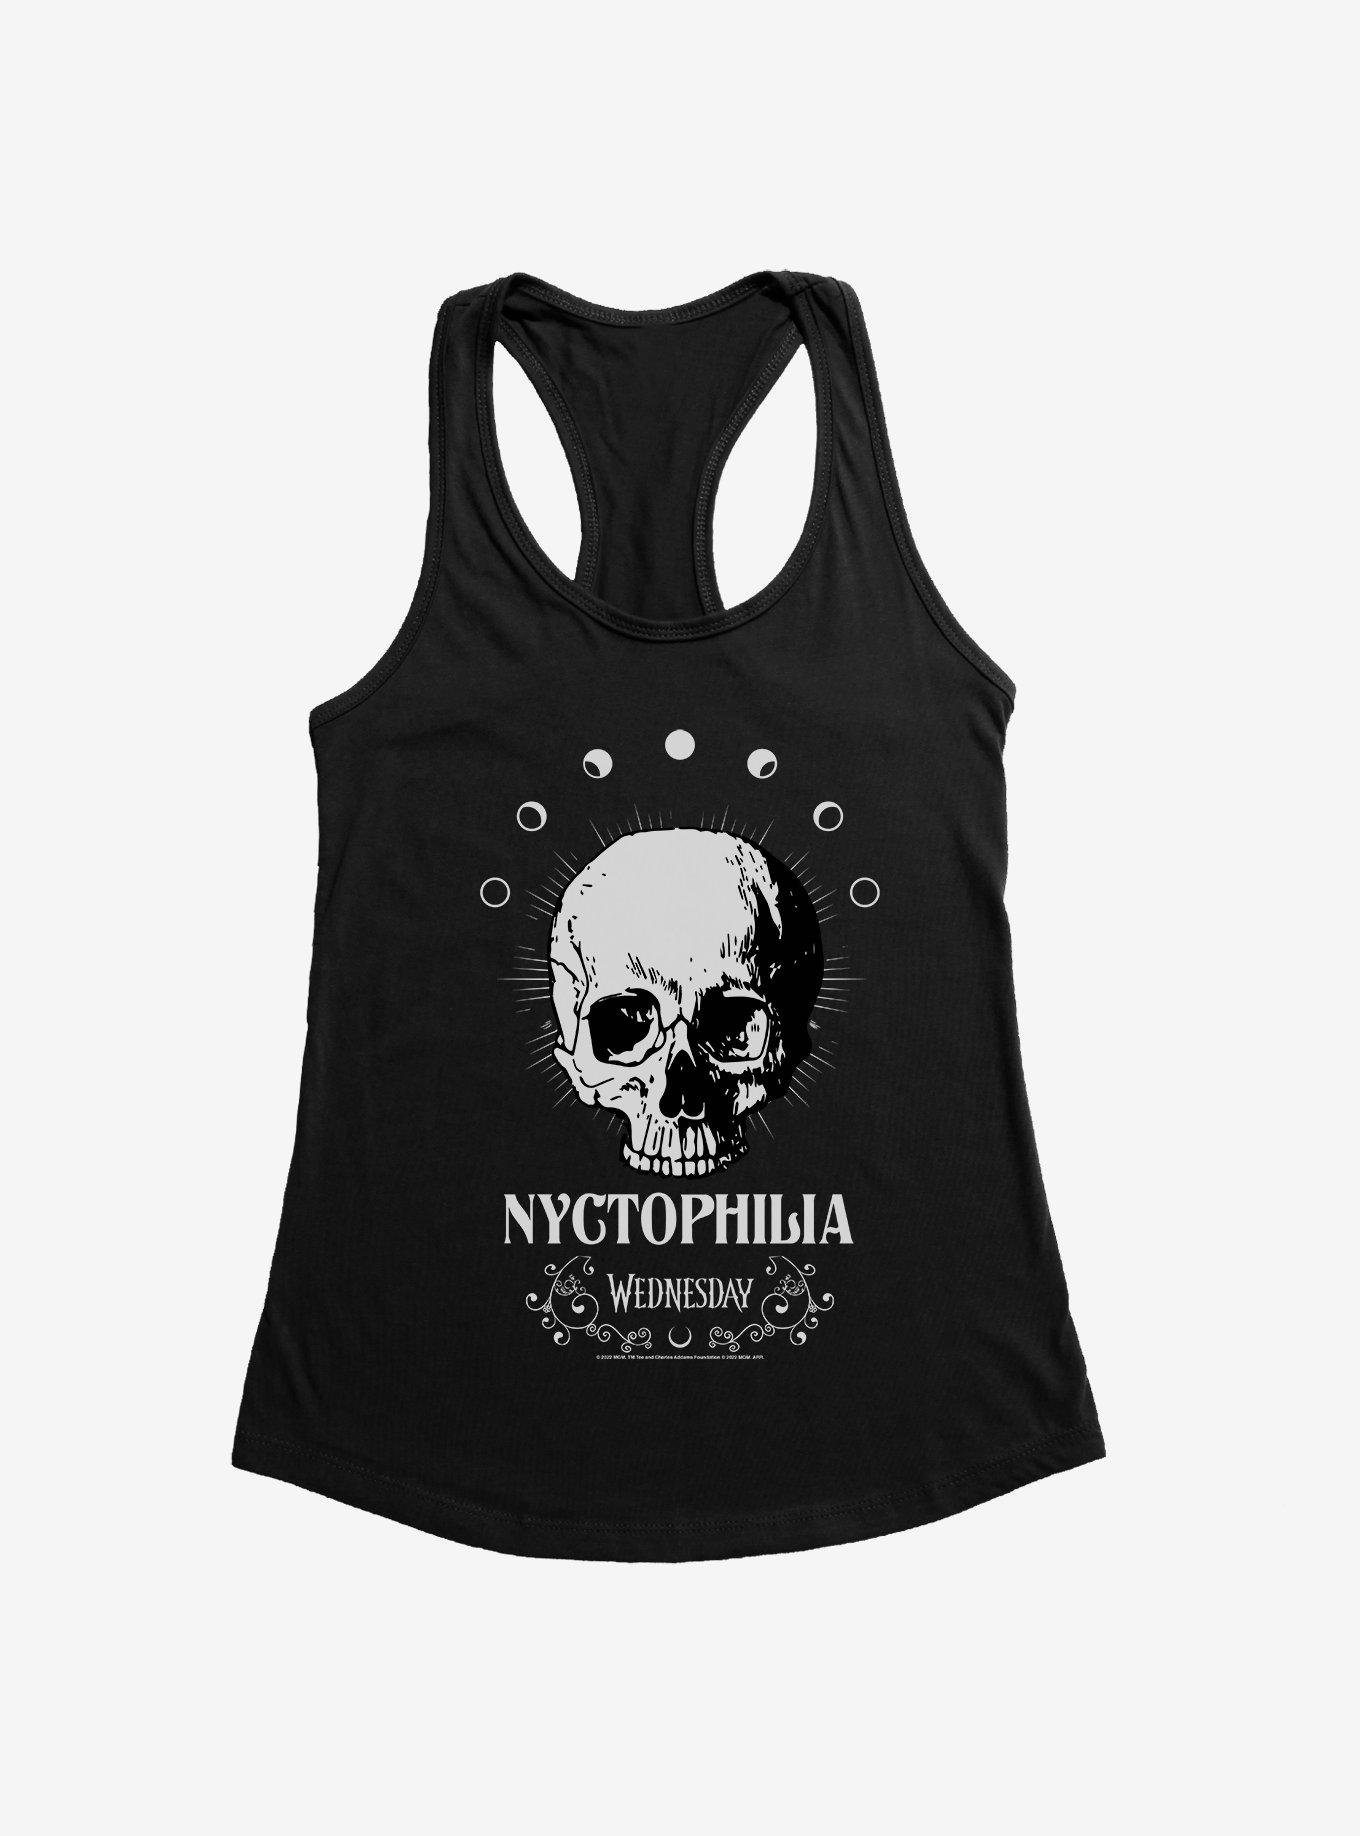 Wednesday Nyctophilia Girls Tank, BLACK, hi-res